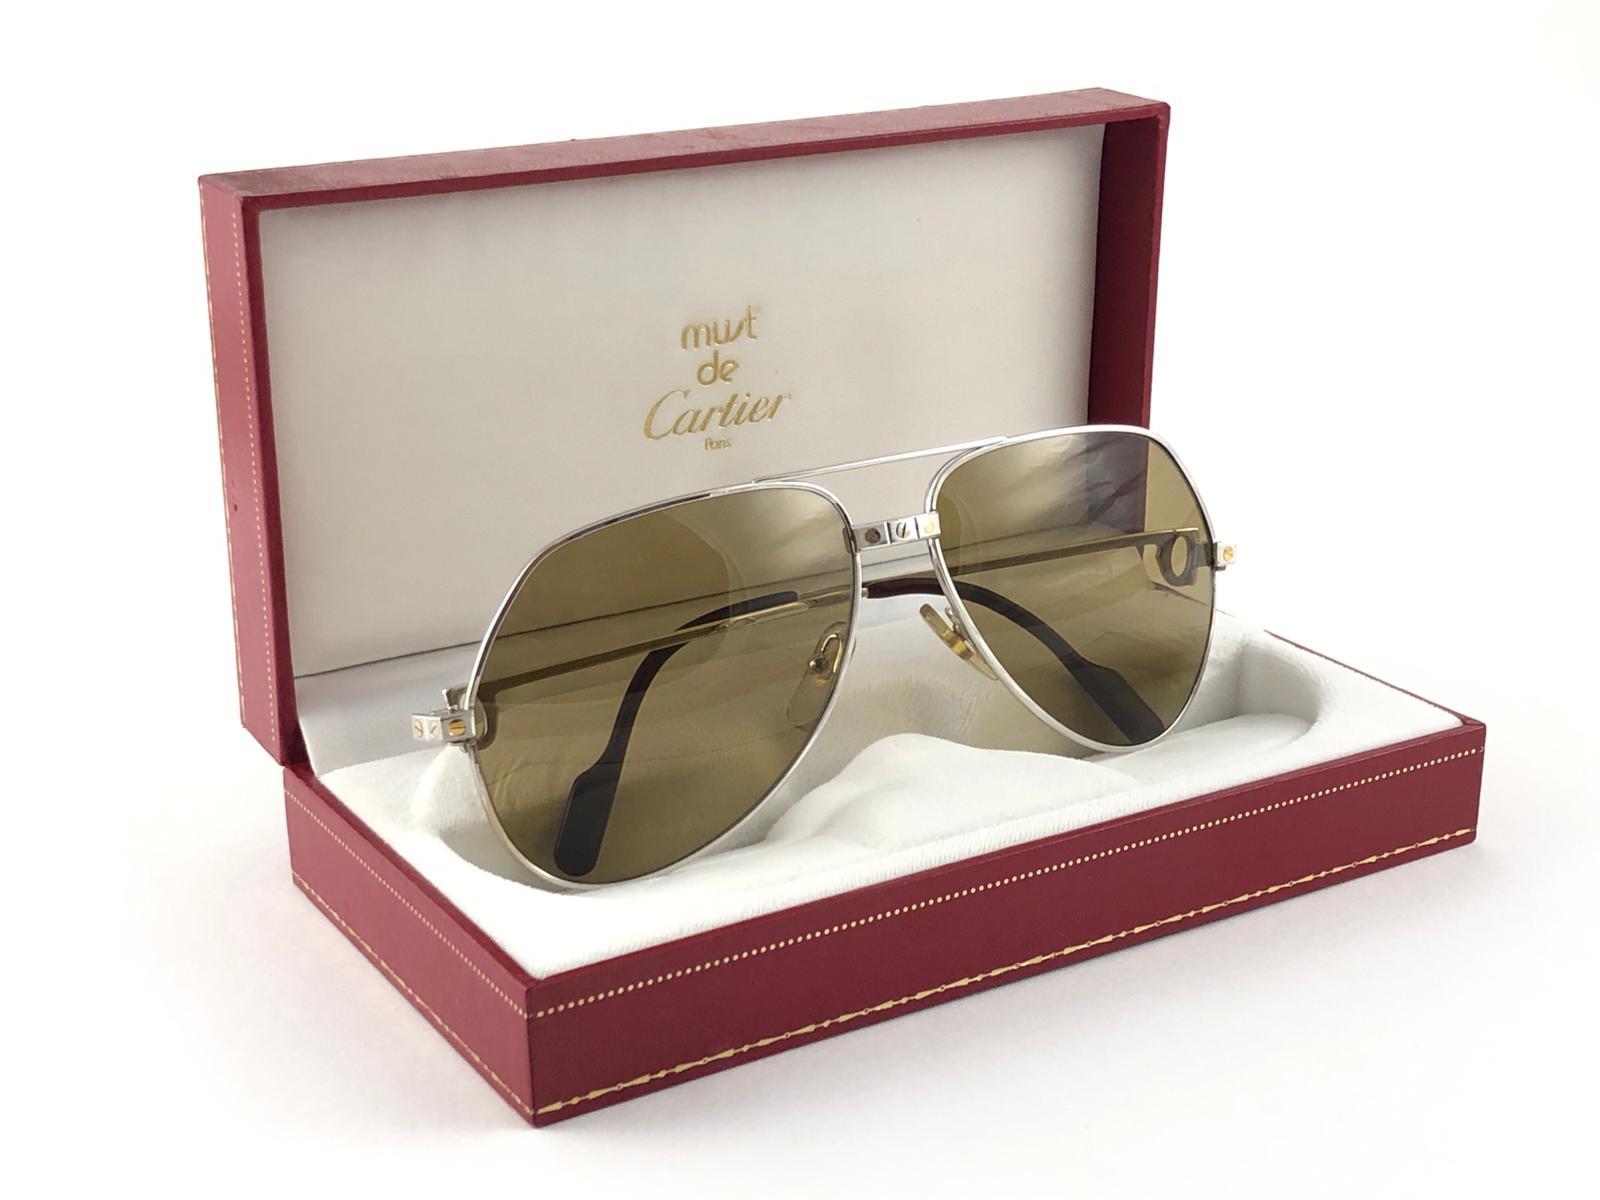 New Cartier Aviator Santos in the ultra rare Platinum plated sunglasses with gold mirror (uv protection) lenses in a Full Cartier Set.
Frame is with the famous Vendome stripes on the front and on the sides.
All hallmarks. Cartier gold signs on the